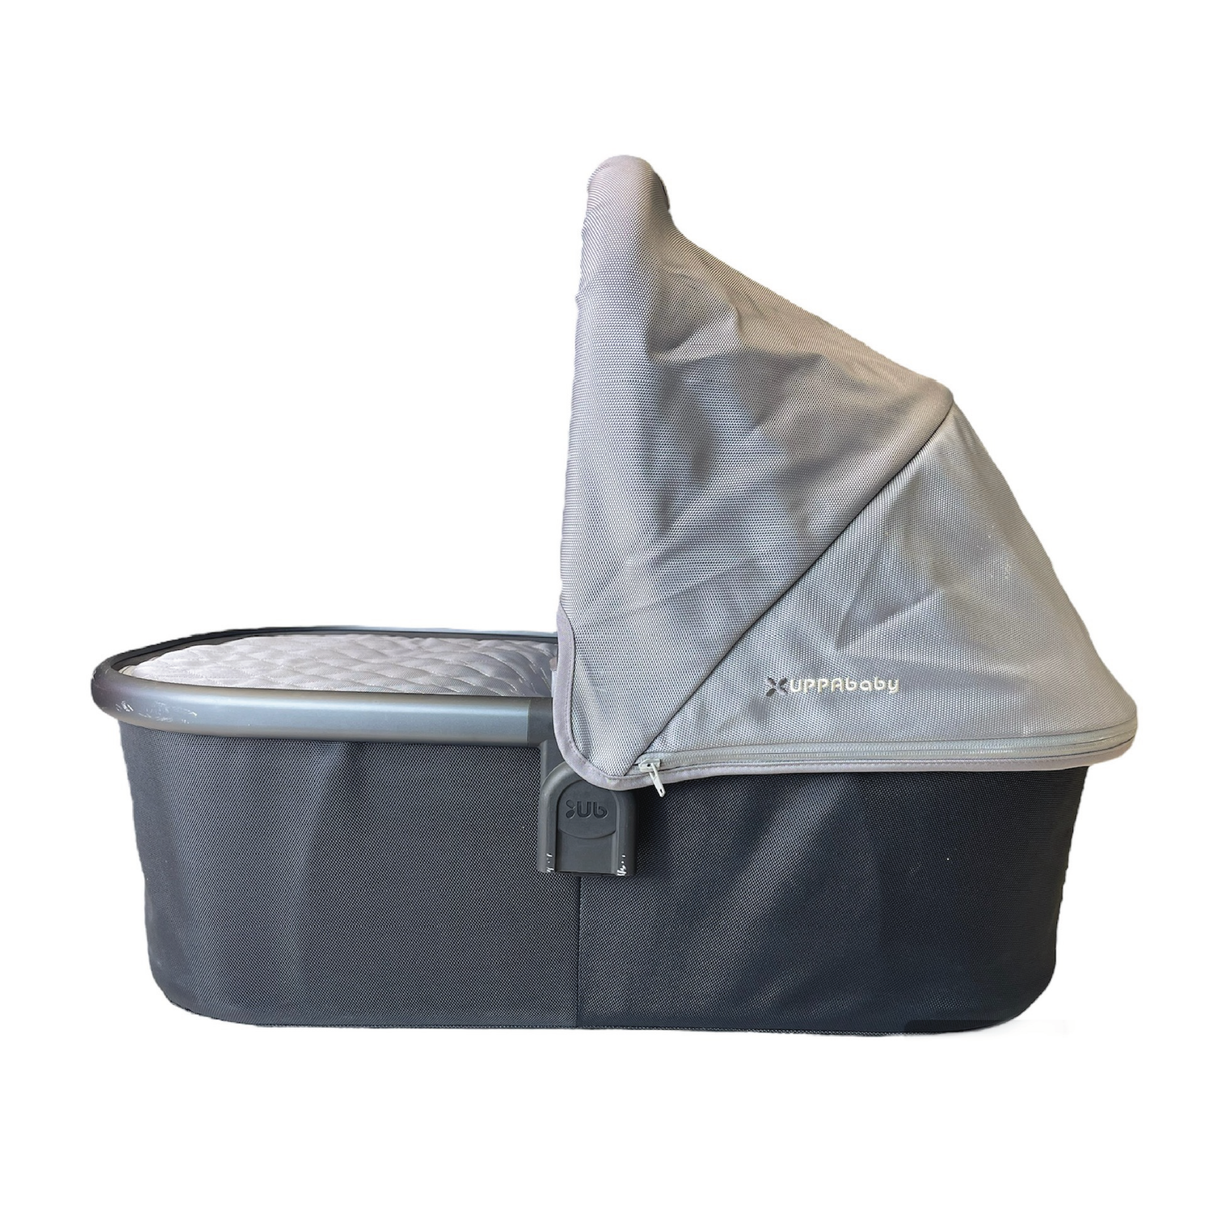 A Second Chance -Bassinet UPPAbaby - Delivery All Over Lebanon